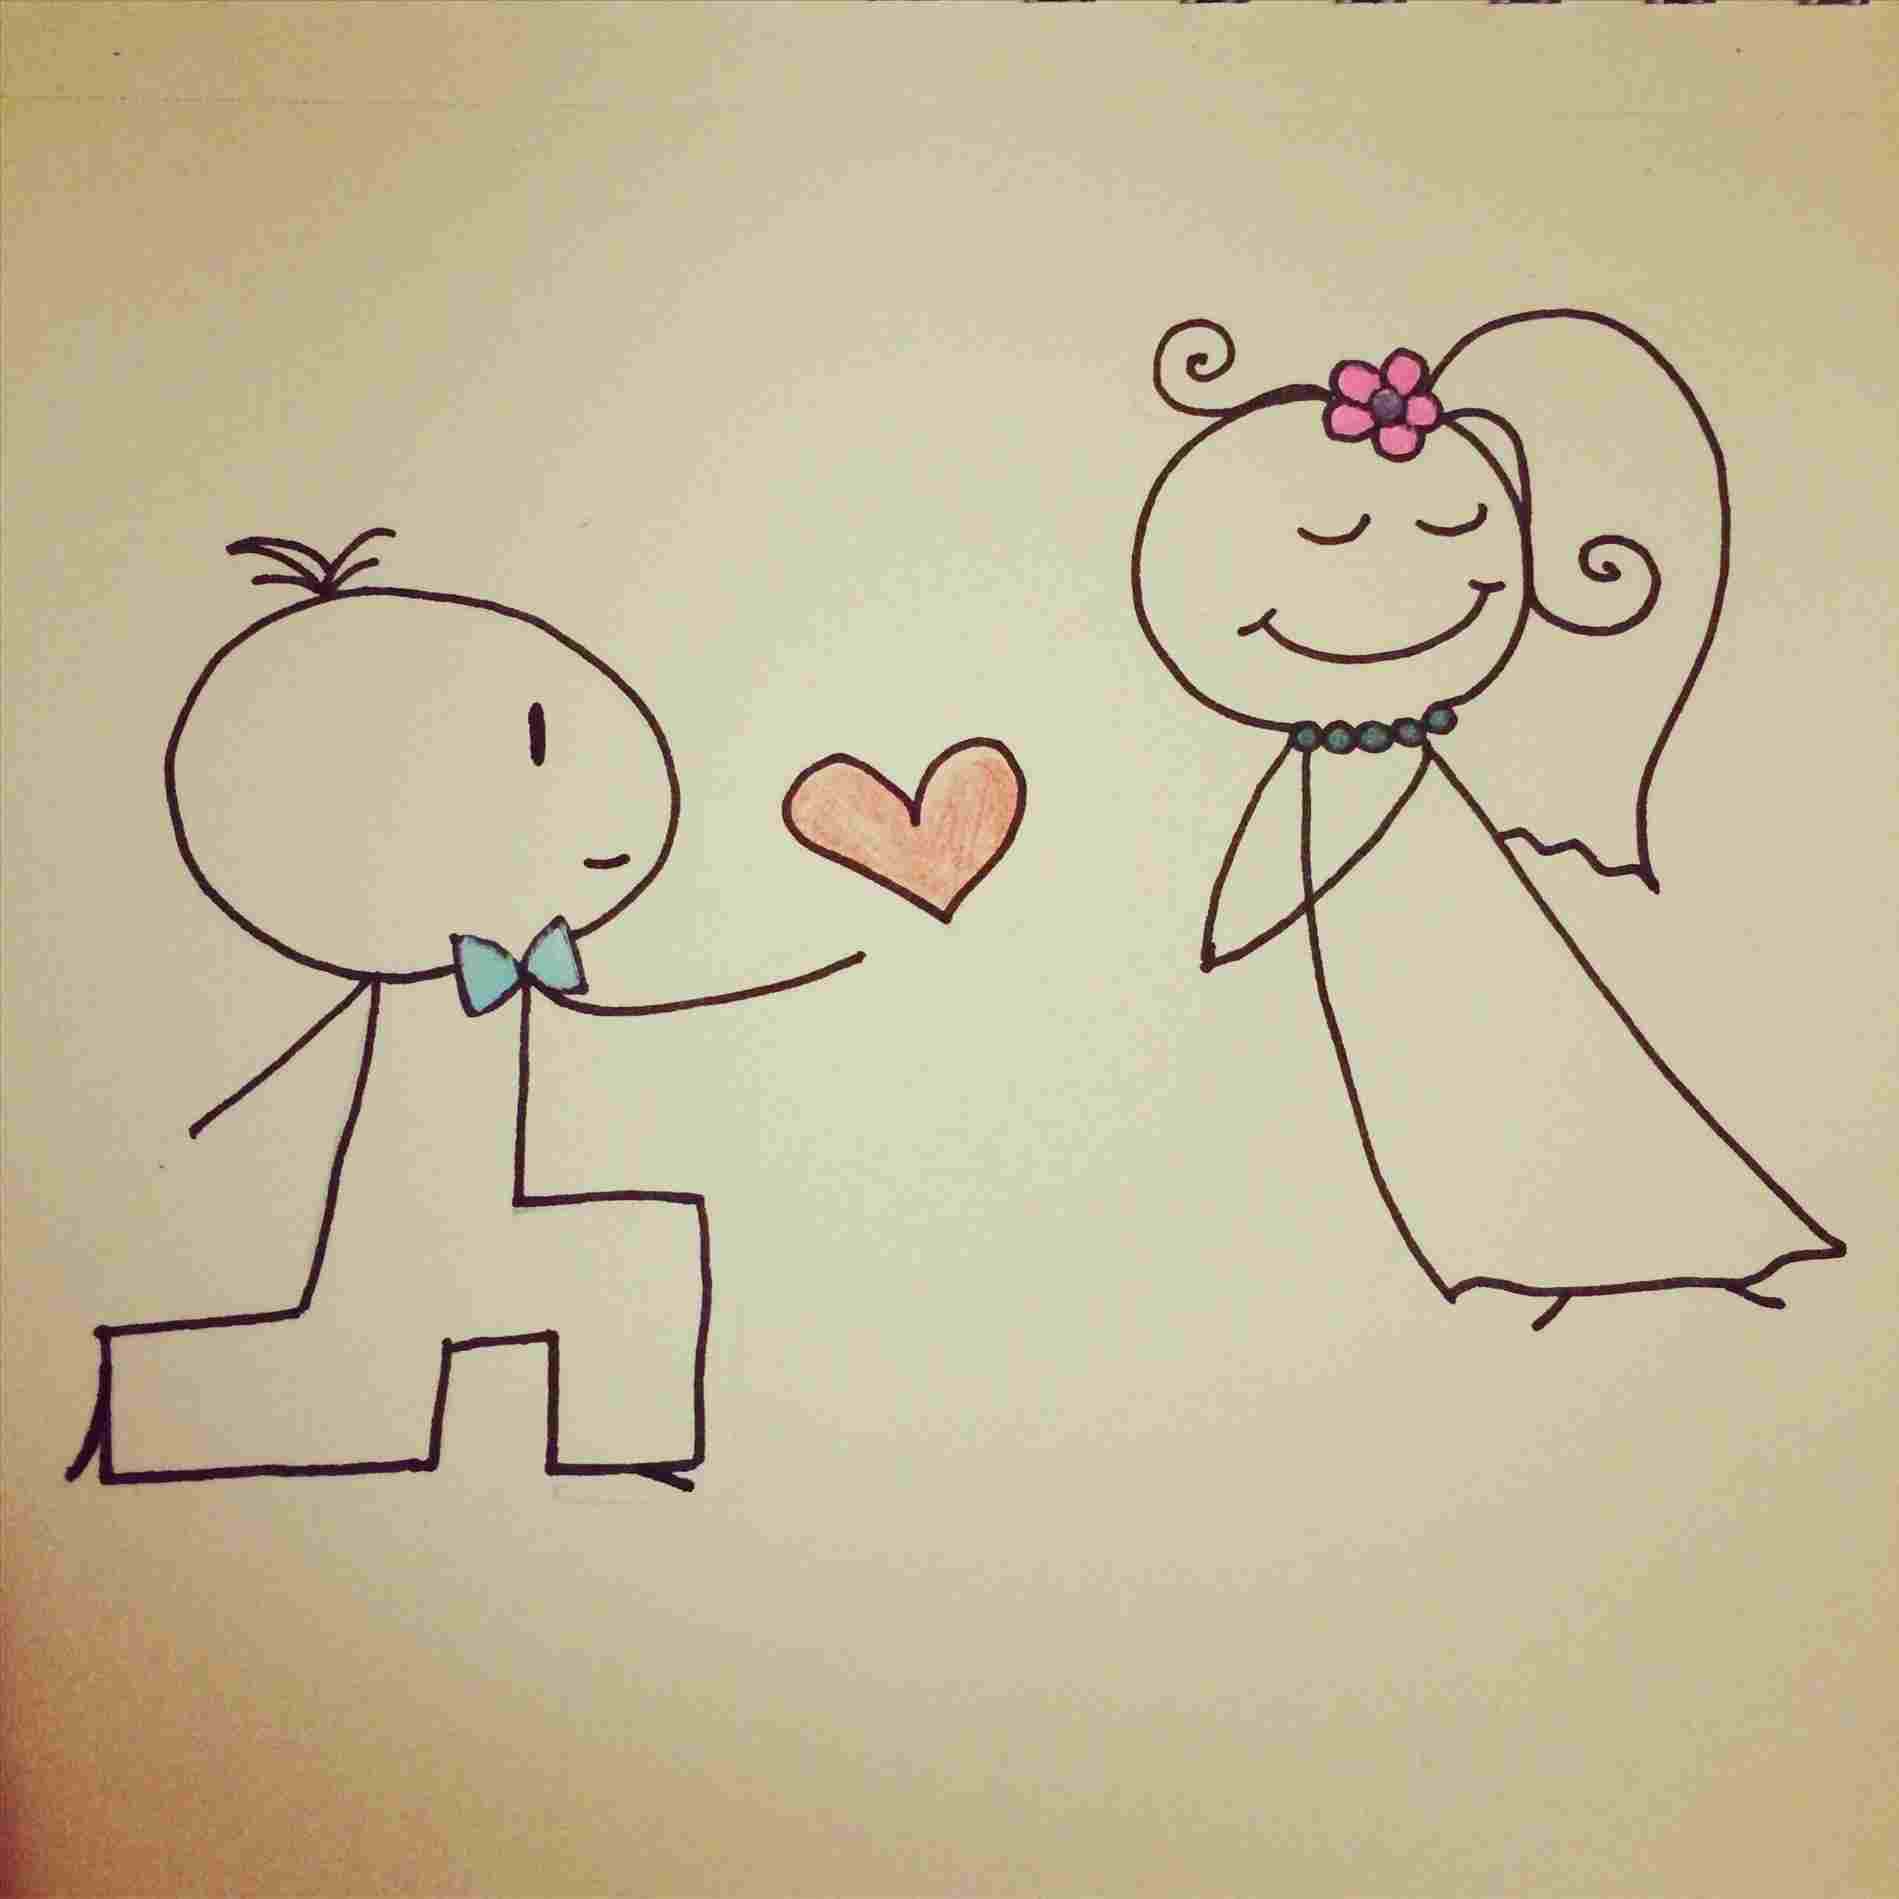 Cute Drawing Ideas For Your Girlfriend - Cute Drawing Ideas For Your Bo...